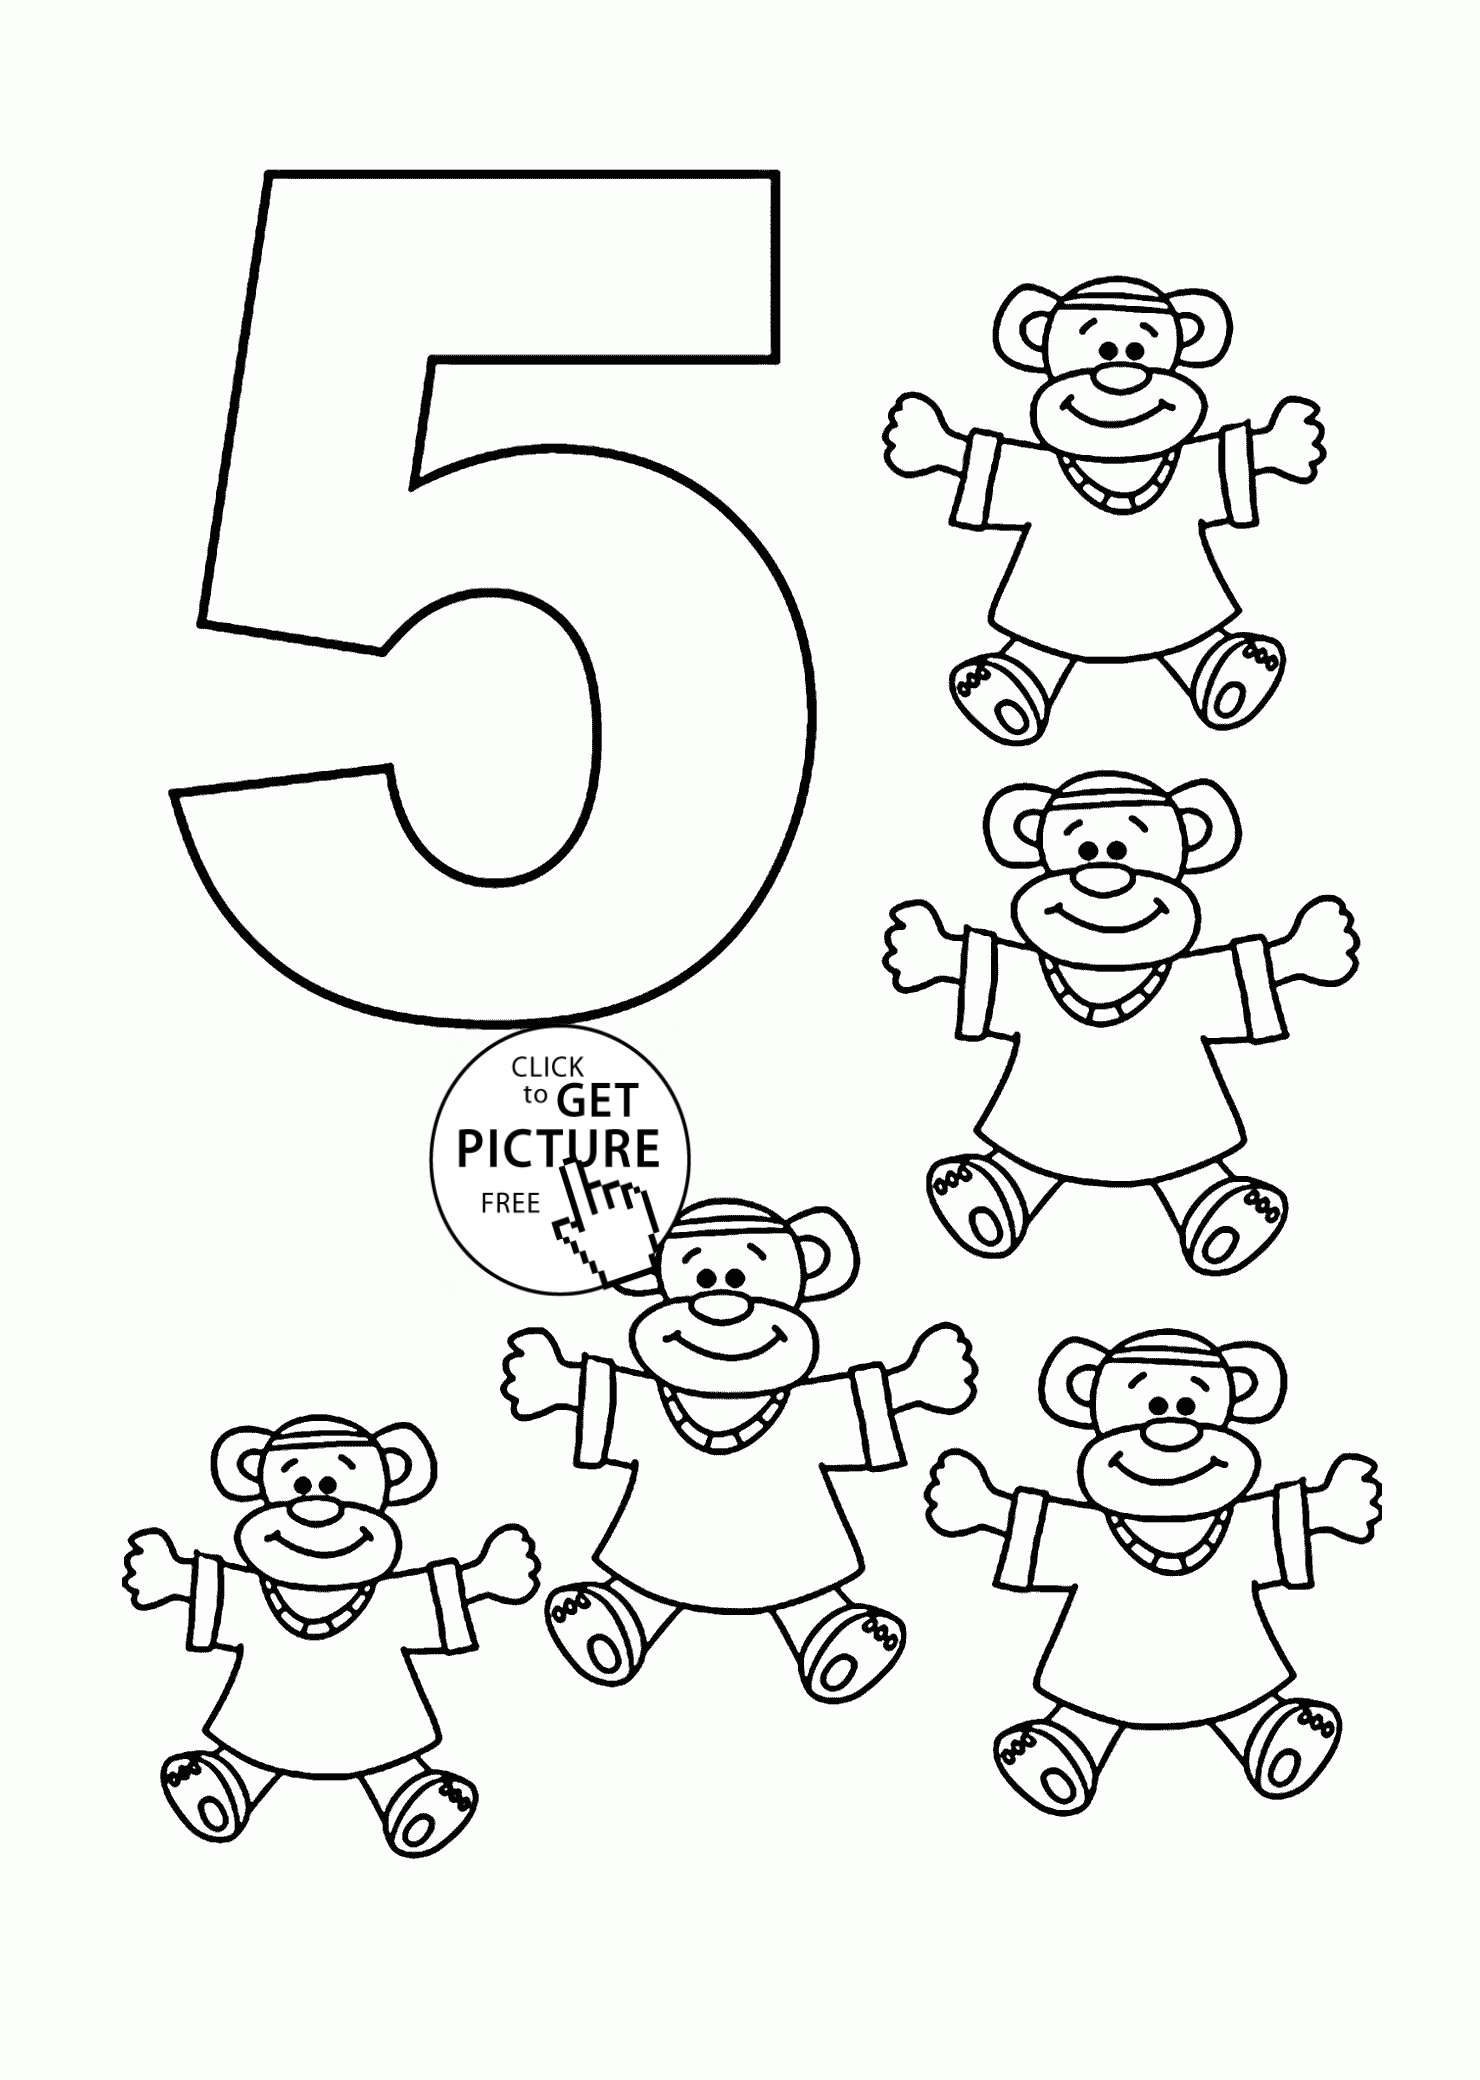 colouring sheets year 1 number 5 coloring pages for kids counting sheets sheets 1 colouring year 